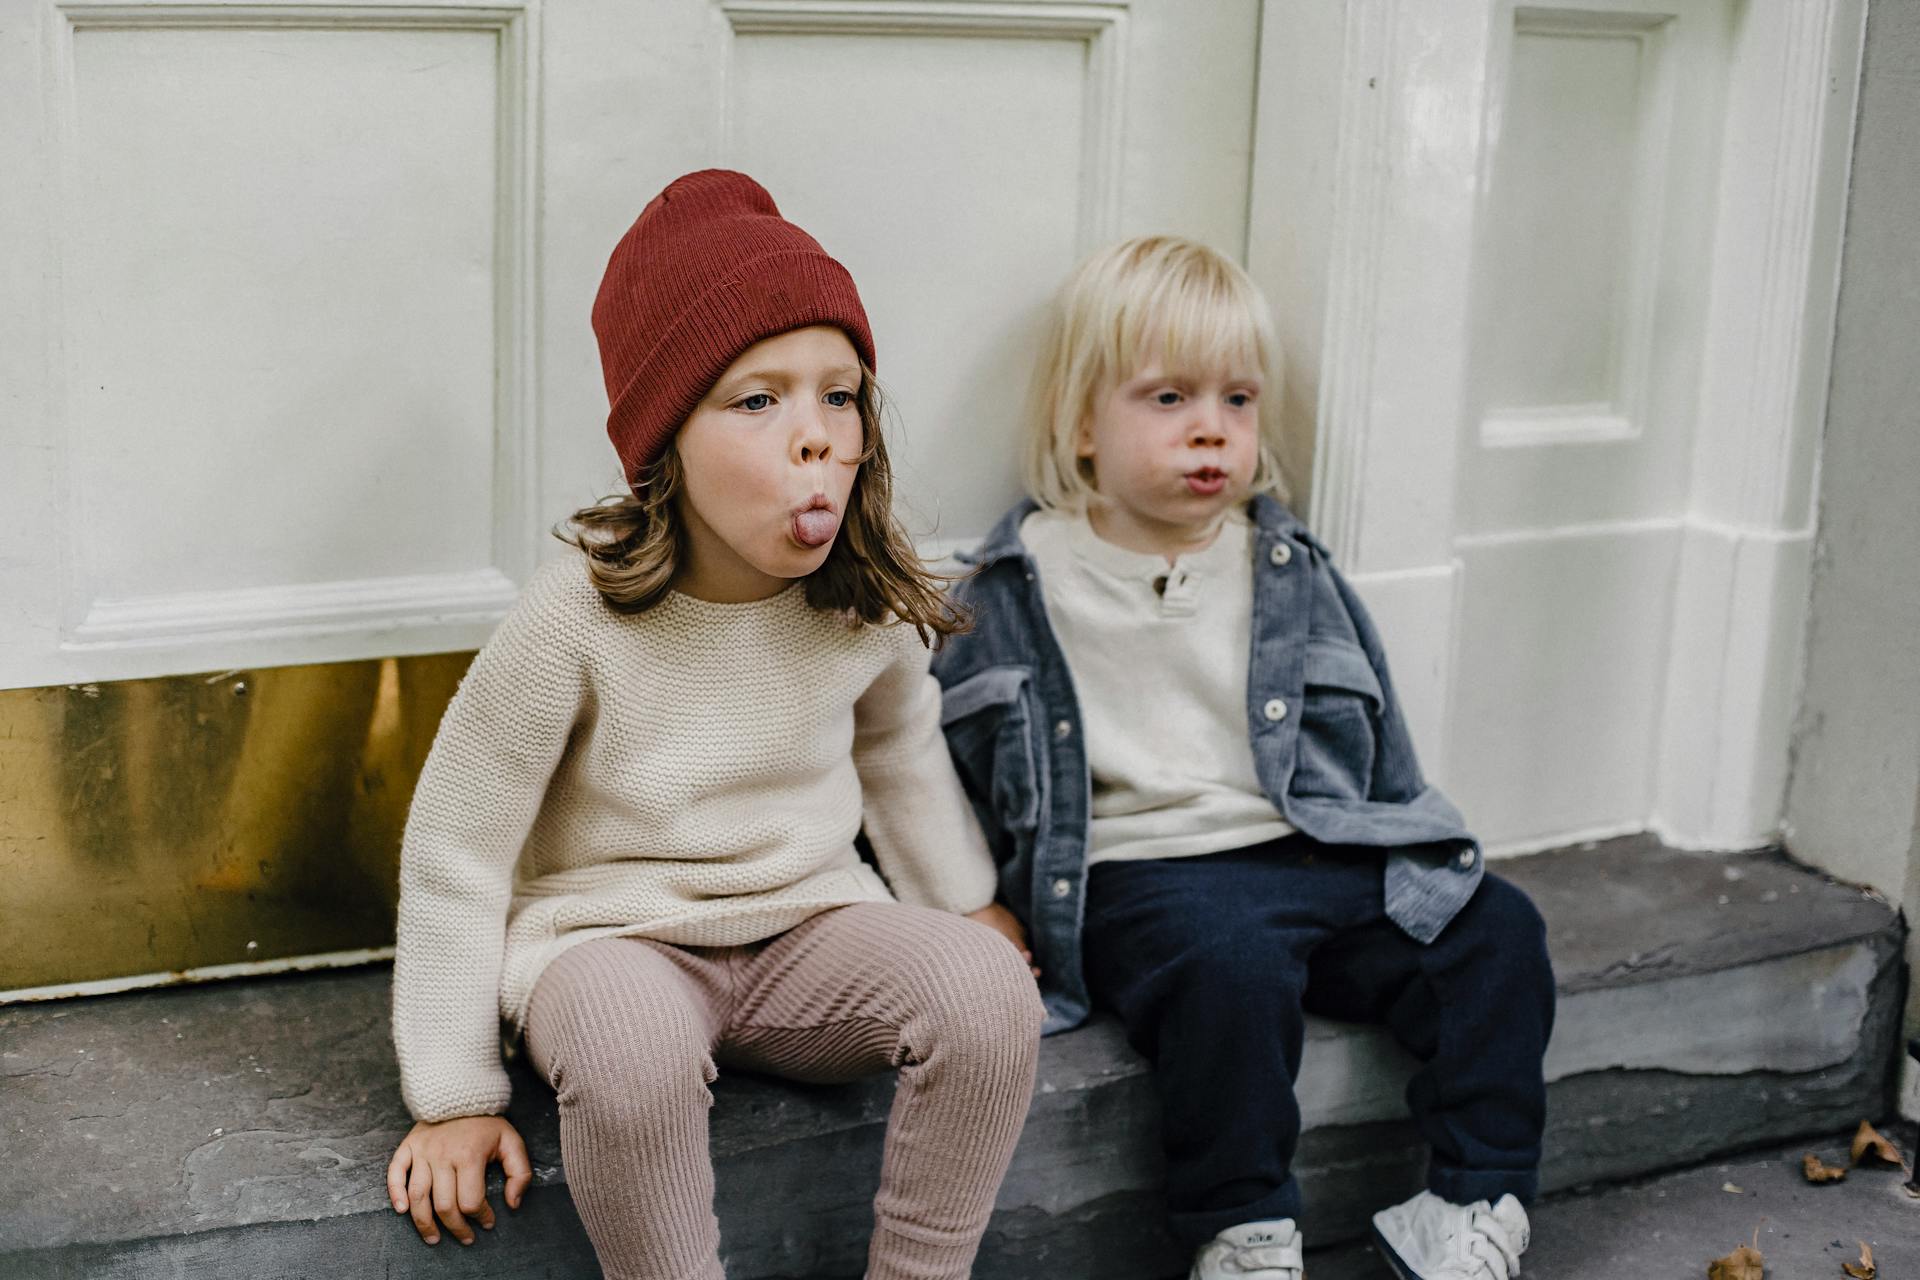 Two kids sitting on the porch making funny faces | Source: Pexels